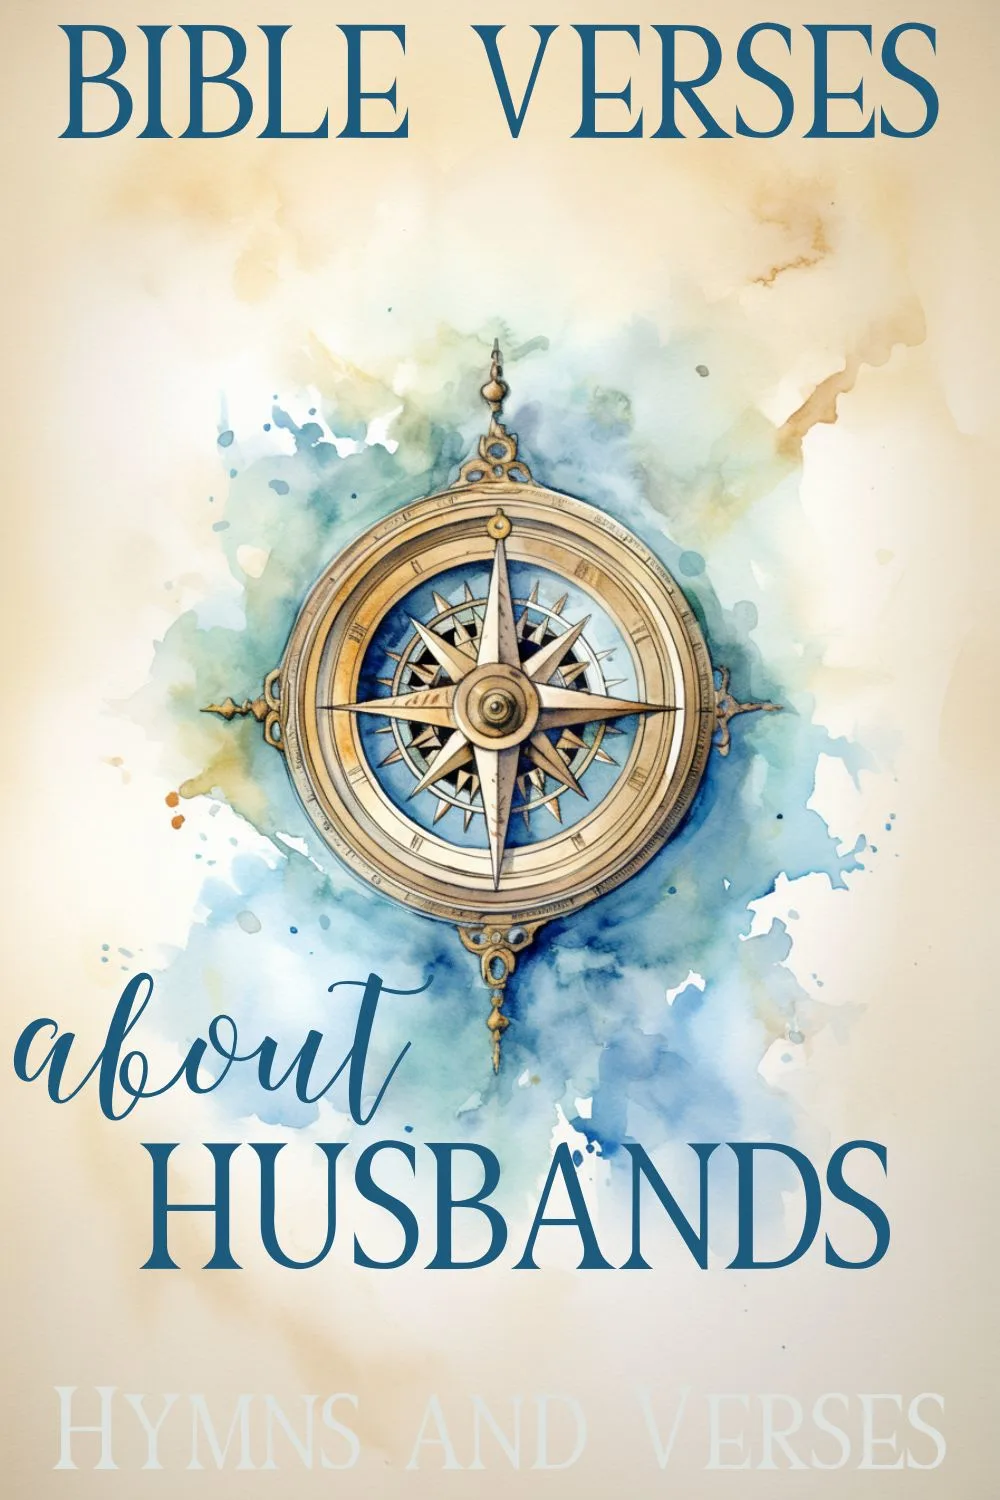 Pin image for bible verses on husbands post